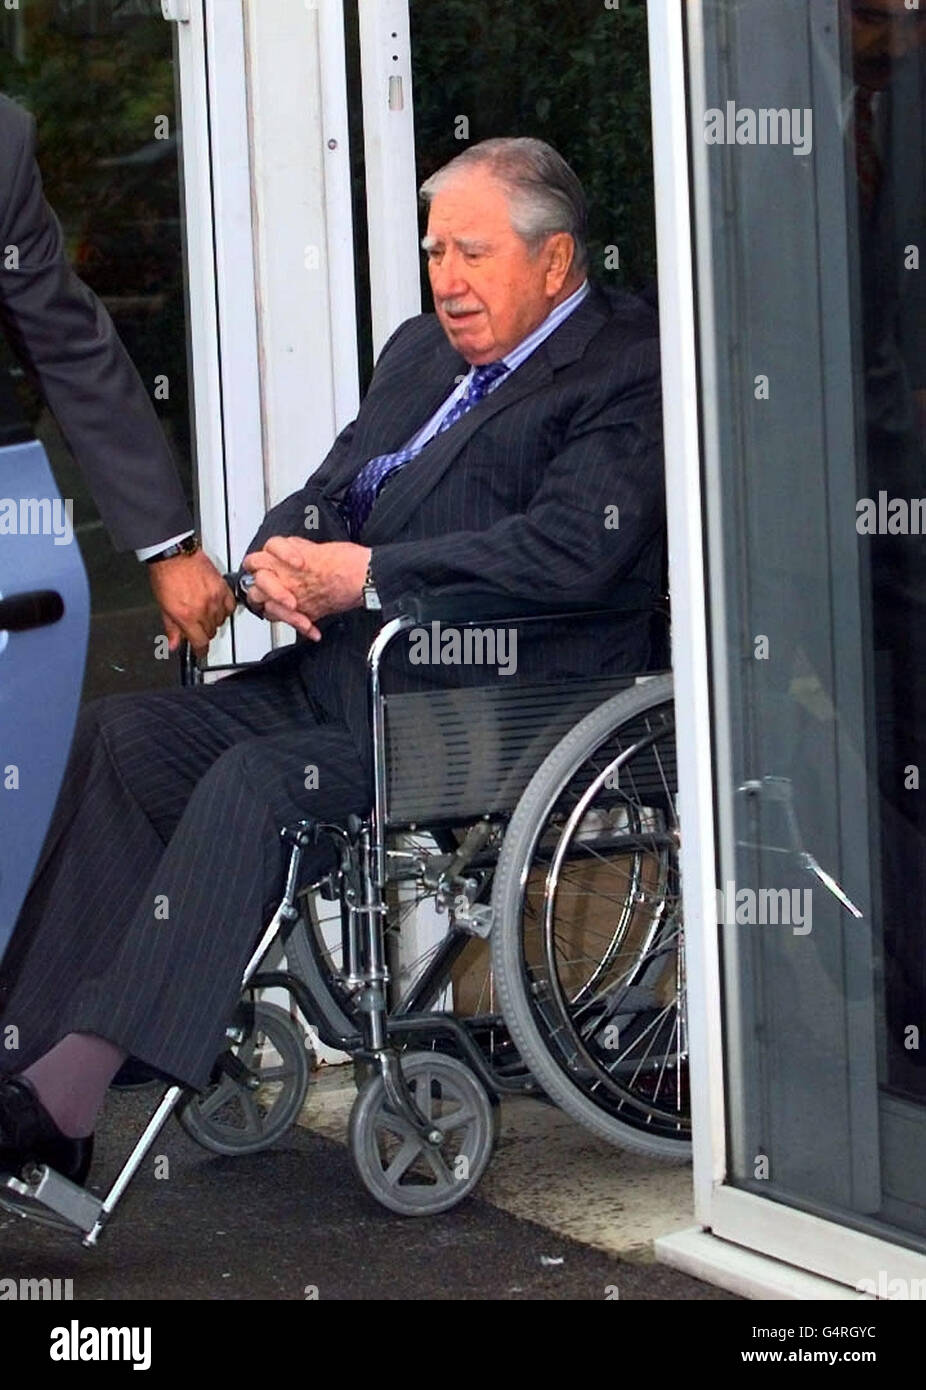 Former Chilean dictator General Pinochet leaves the Princess Margaret Hospital in Windsor where he was due to undergo further check-ups and urological tests. * 29/10/2000 Former dictator General Augusto Pinochet who has been admitted to hospital with pneumonia, it emerged. The 84-year-old former Chilean ruler has pneumonia in his left lung and has been admitted to Santiago Military Hospital in Chile, it was reported. Stock Photo